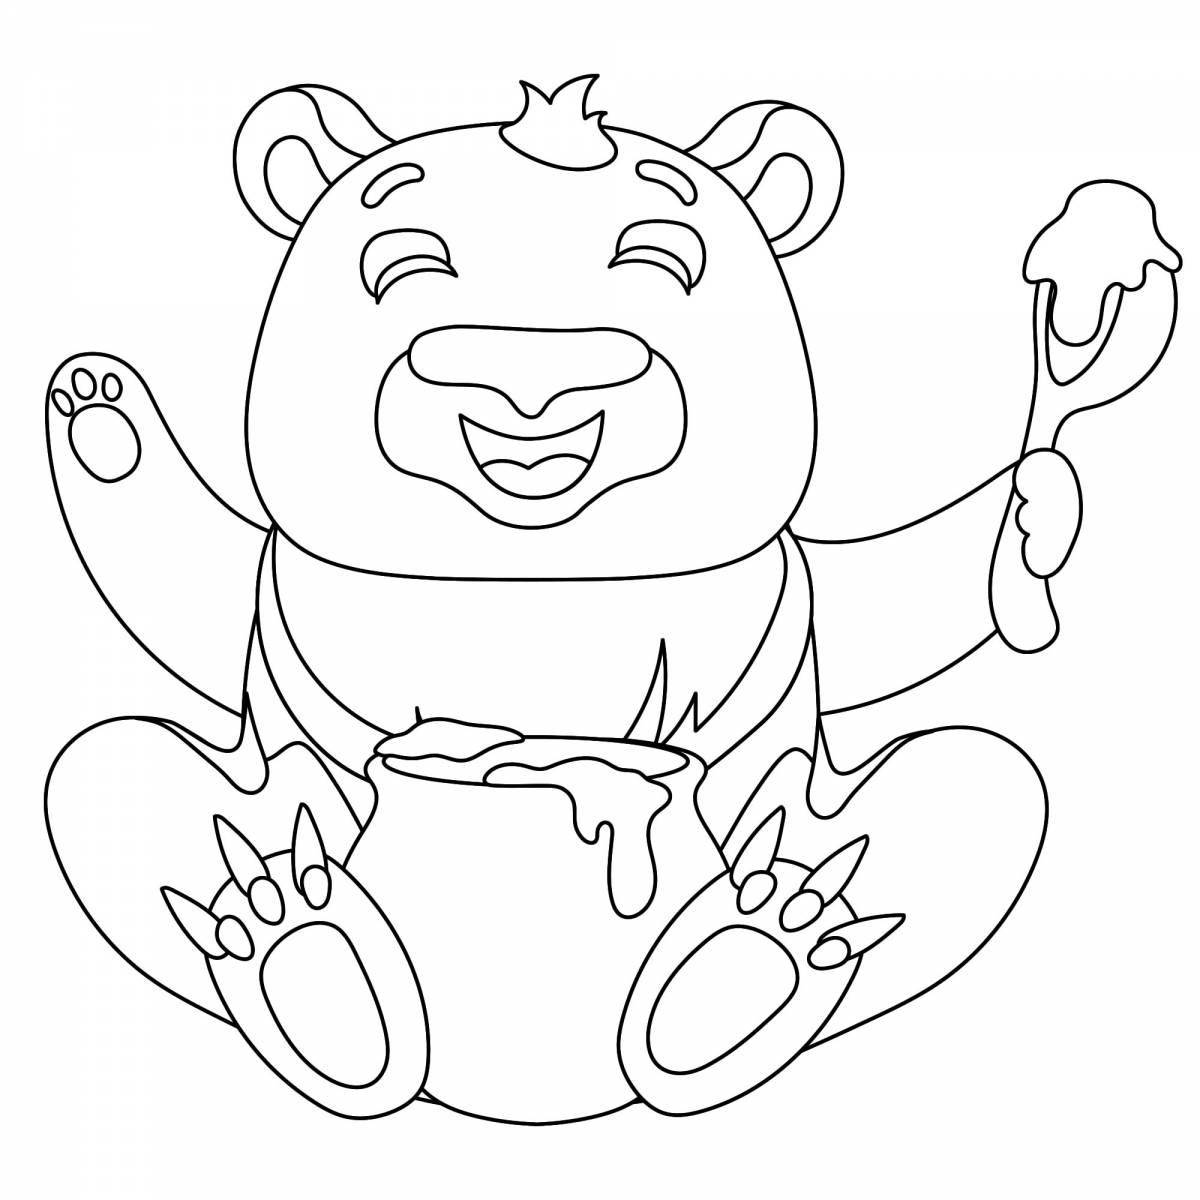 Irresistible bear with honey coloring book